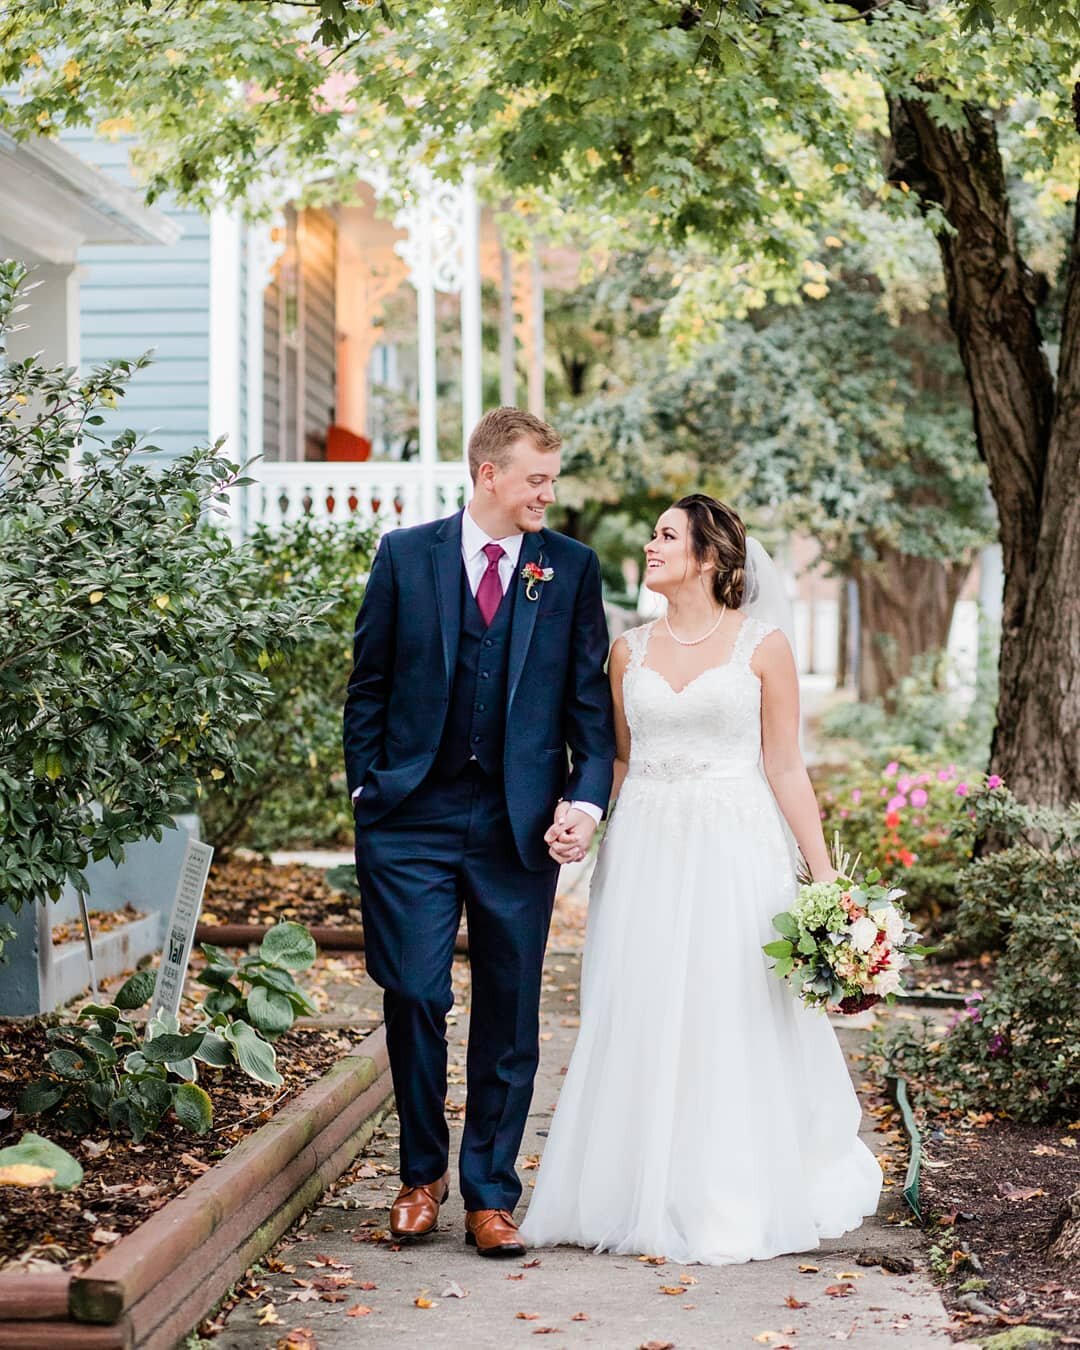 Hard to believe it's already been a year since Meagan &amp; Caleb's beautiful wedding day! Happy anniversary, you two!! 💕
.
.
.
.
.
.
. 
#incontrastimages&nbsp;#allsaintschapel #allsaintschapelwedding #raleighweddingvenue&nbsp;#raleighbride #downtow